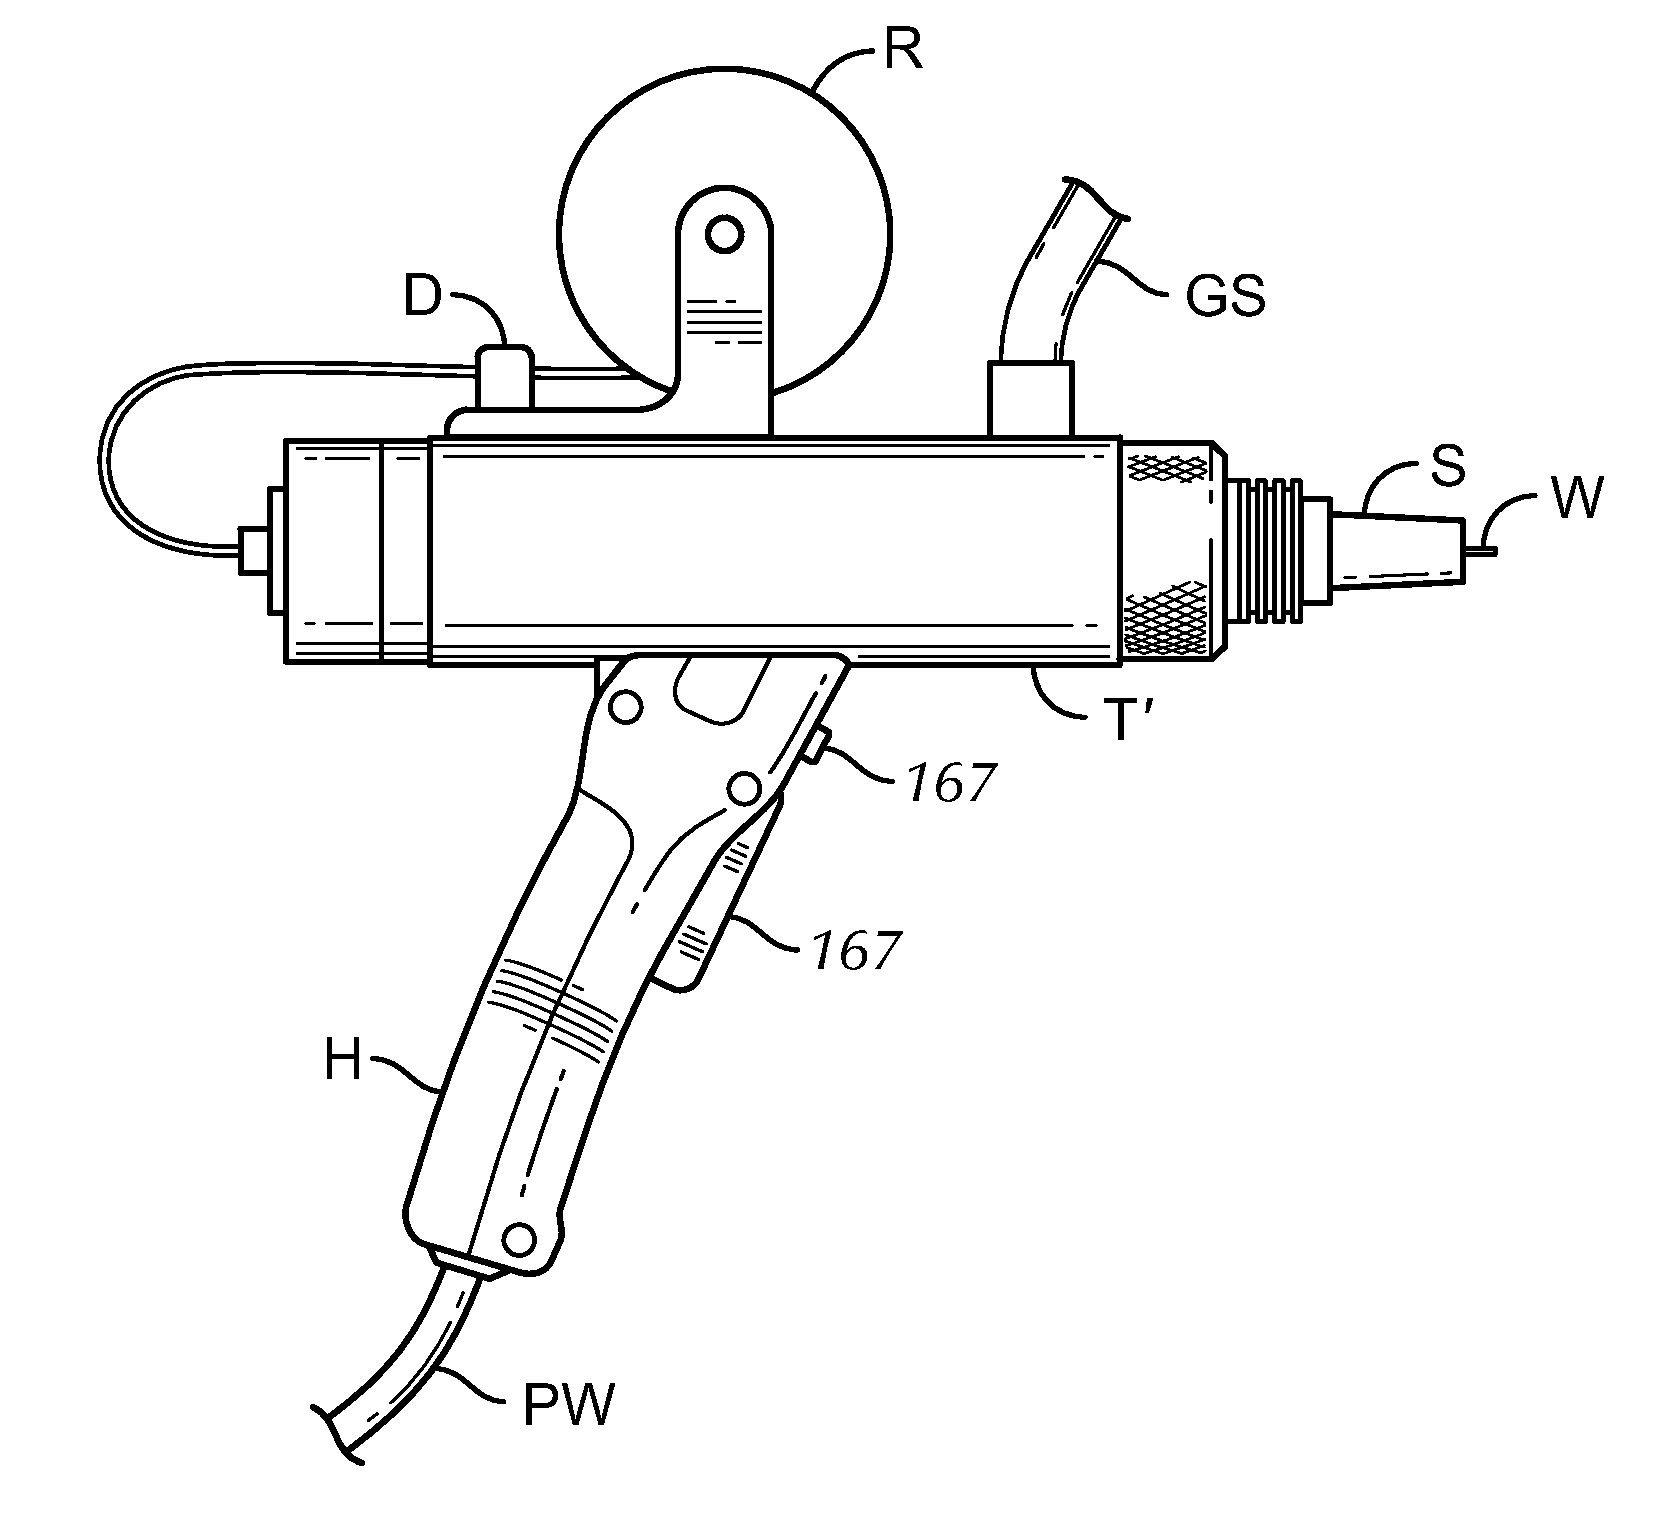 Apparatus and Method for use of Rotating Arc Process Welding